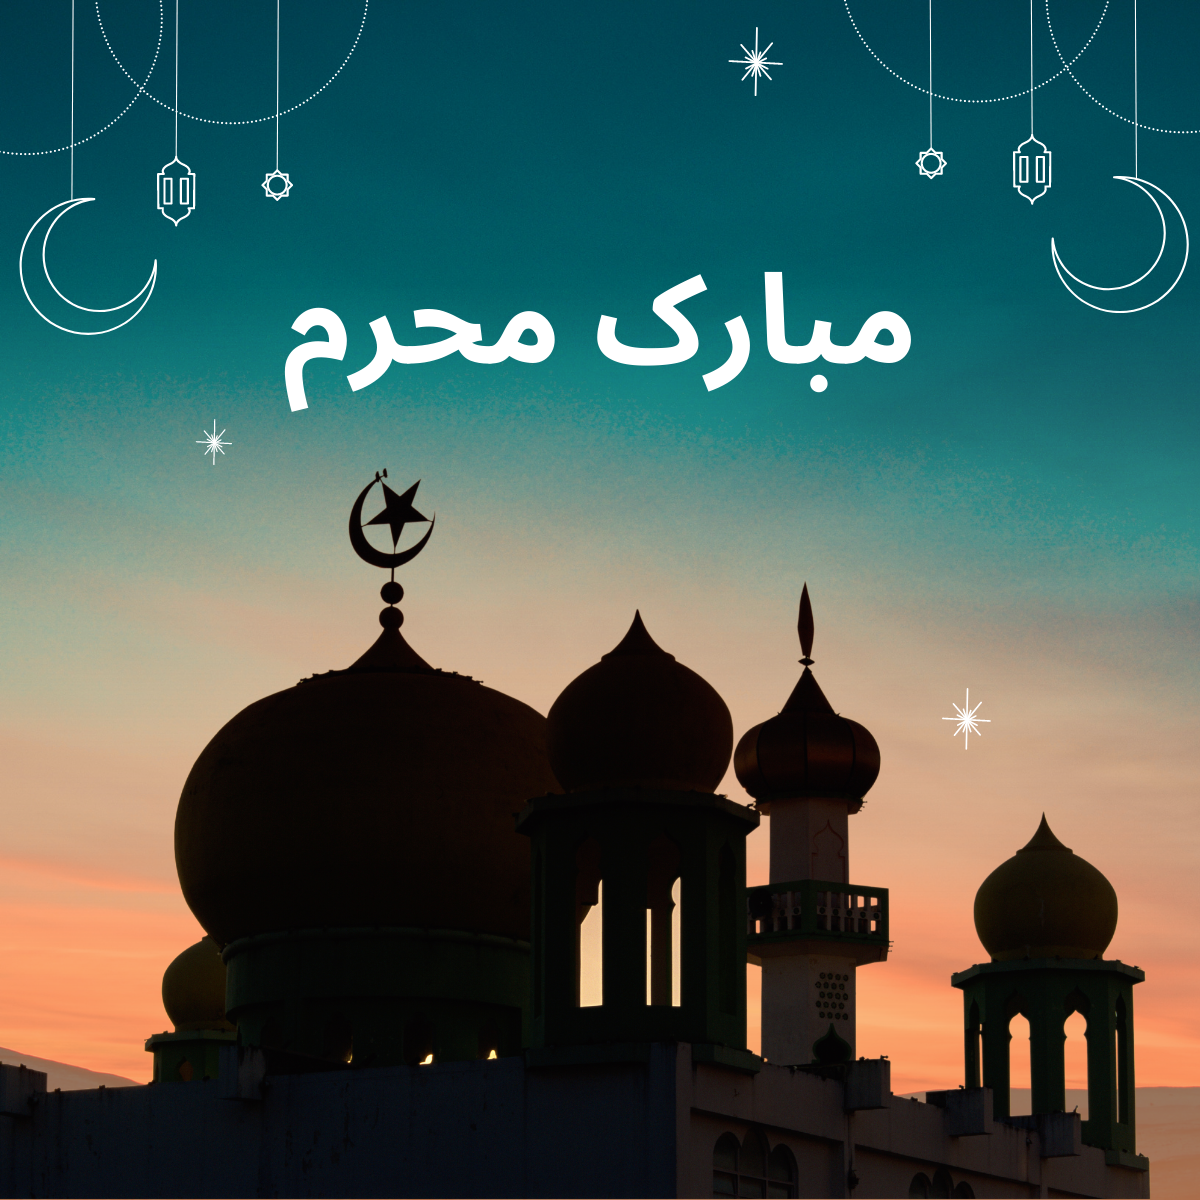 Muharram Mubarak 2022: Urdu Images, Wishes, Greetings, Quotes, Banners, Messages, Dua to share on Social Media